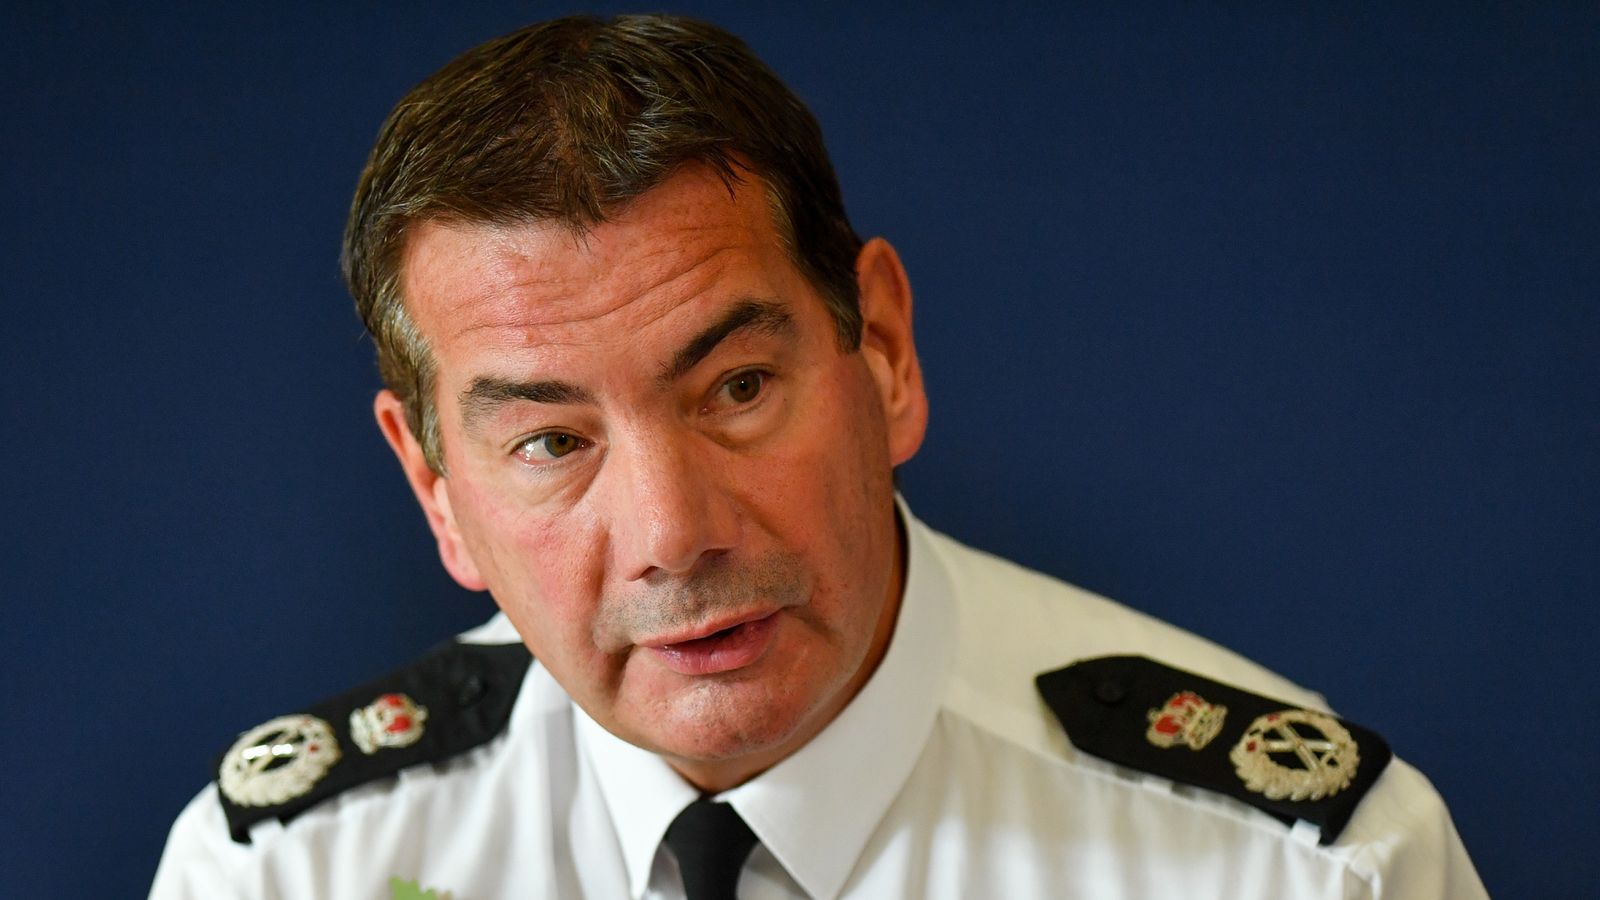 Northamptonshire police chief investigated over wearing Falklands medal despite being 15 at time